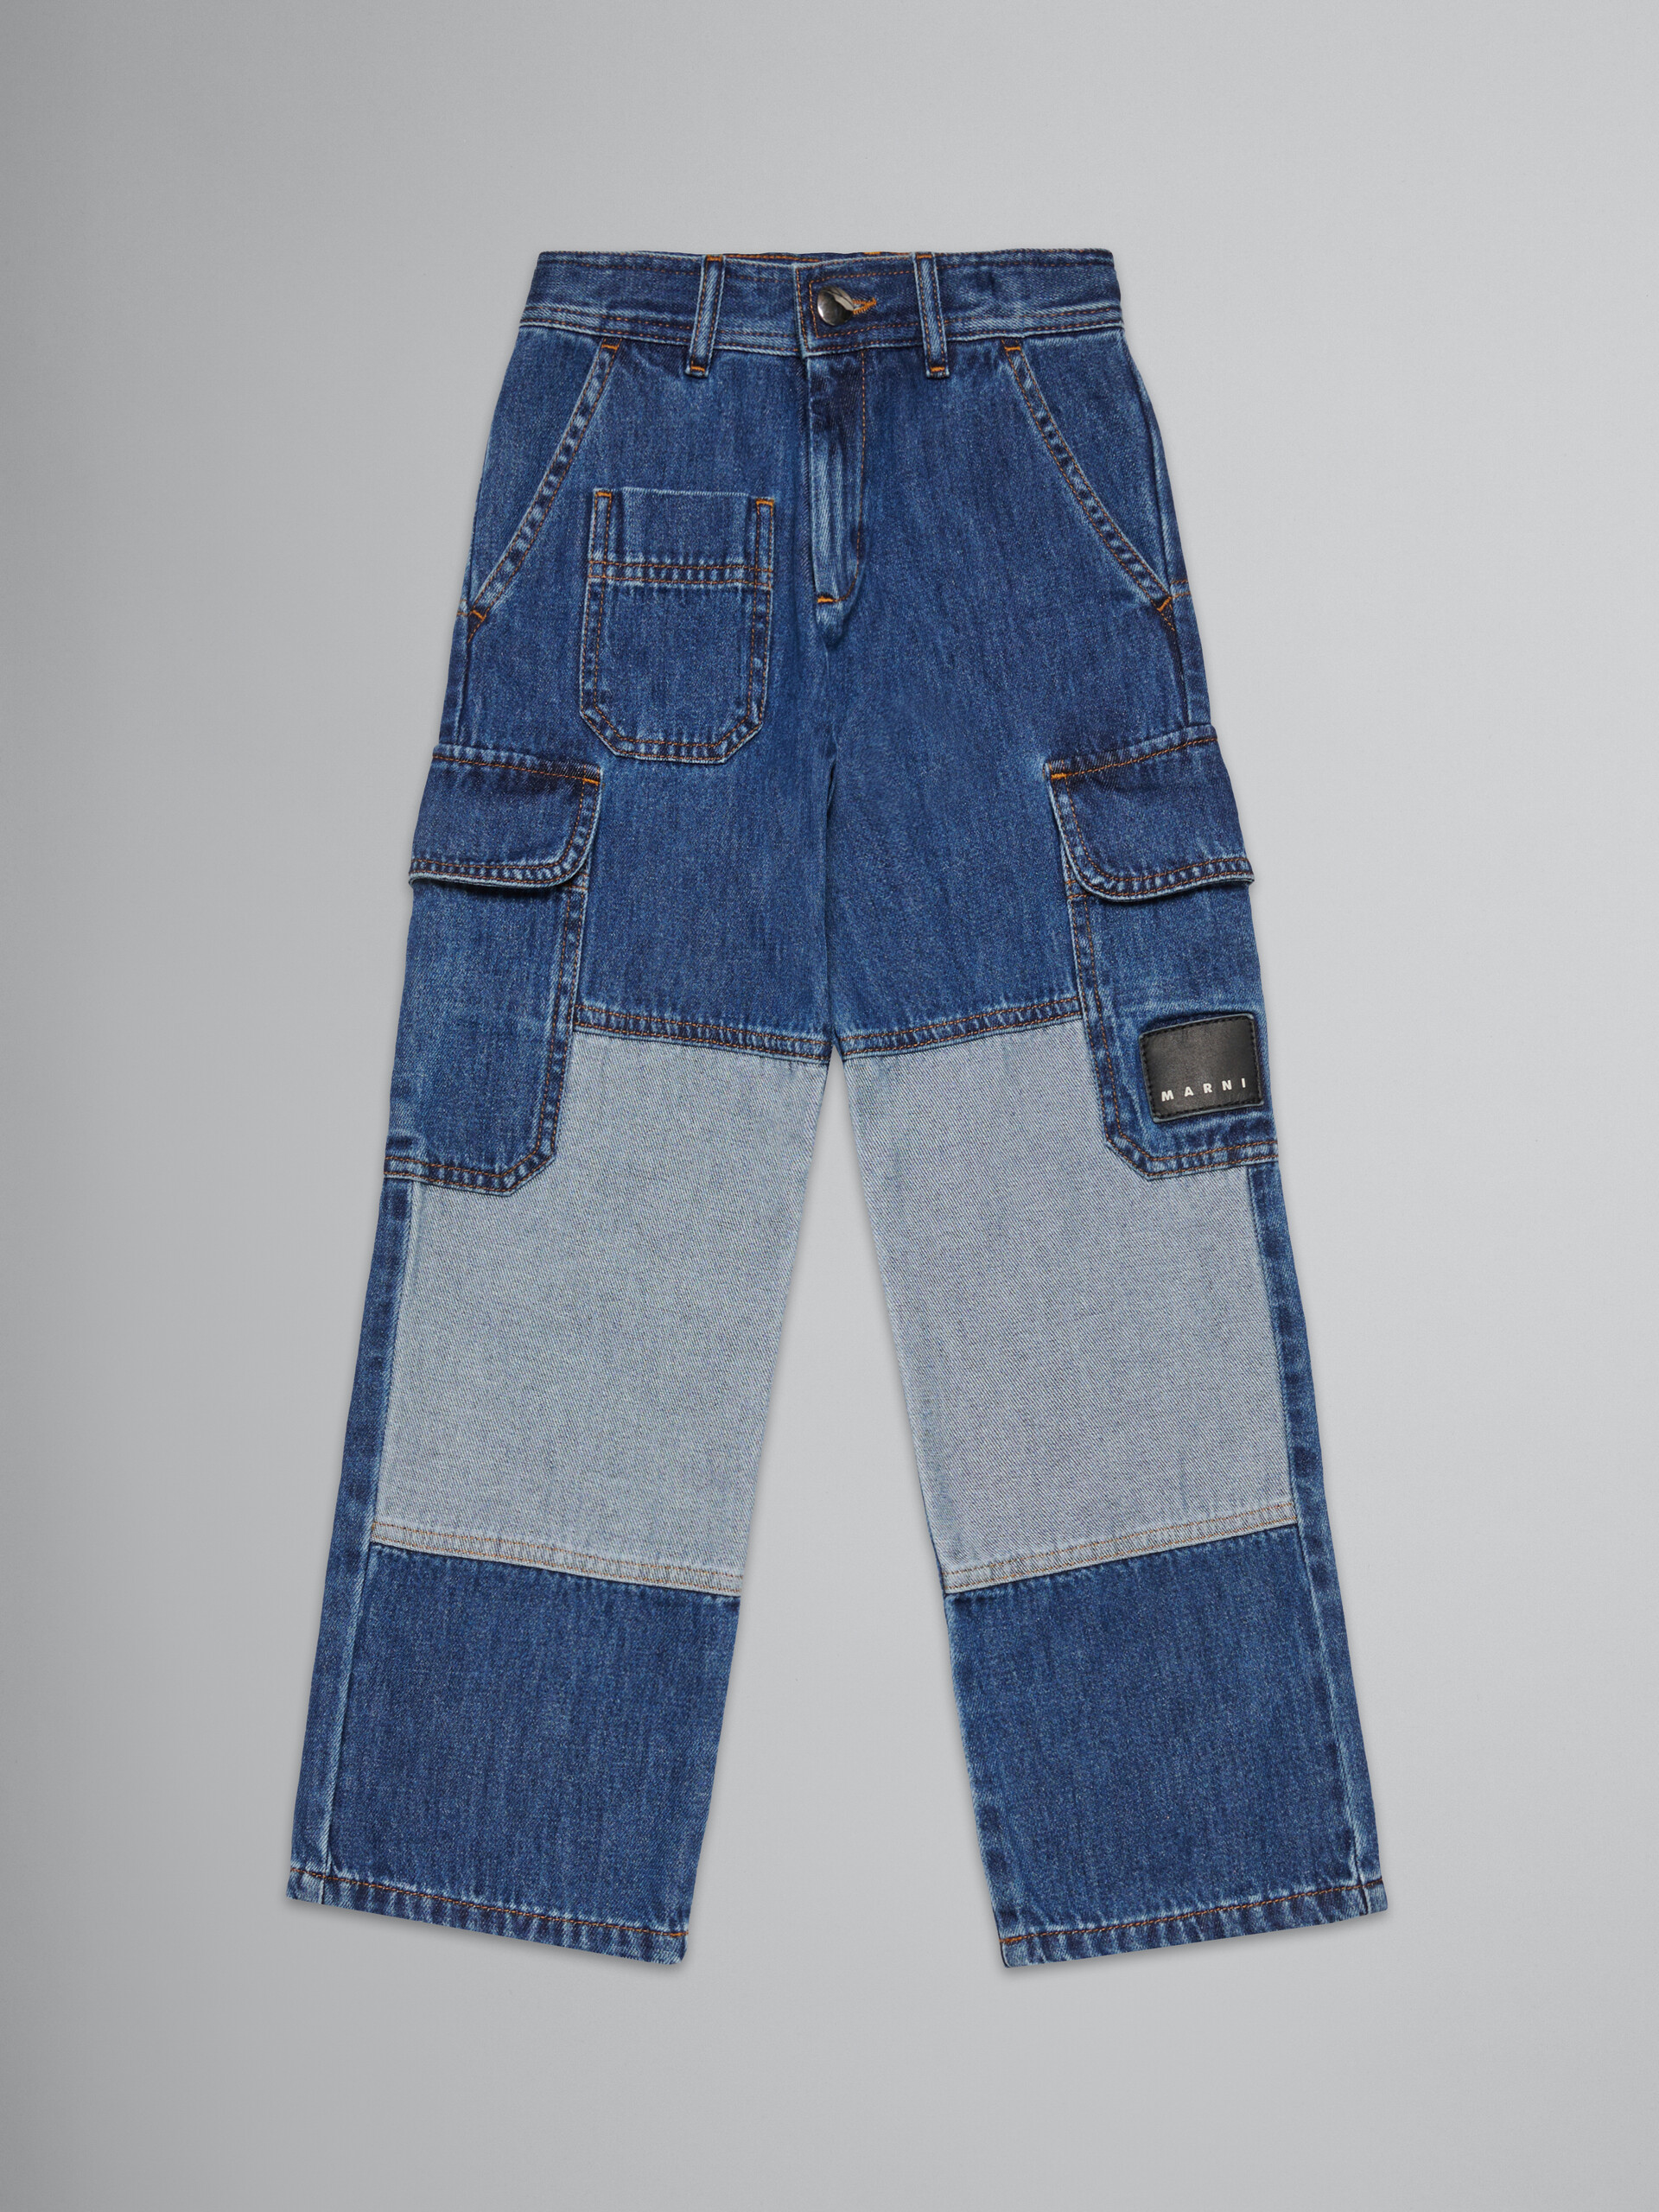 Two-color cargo jeans - Pants - Image 1